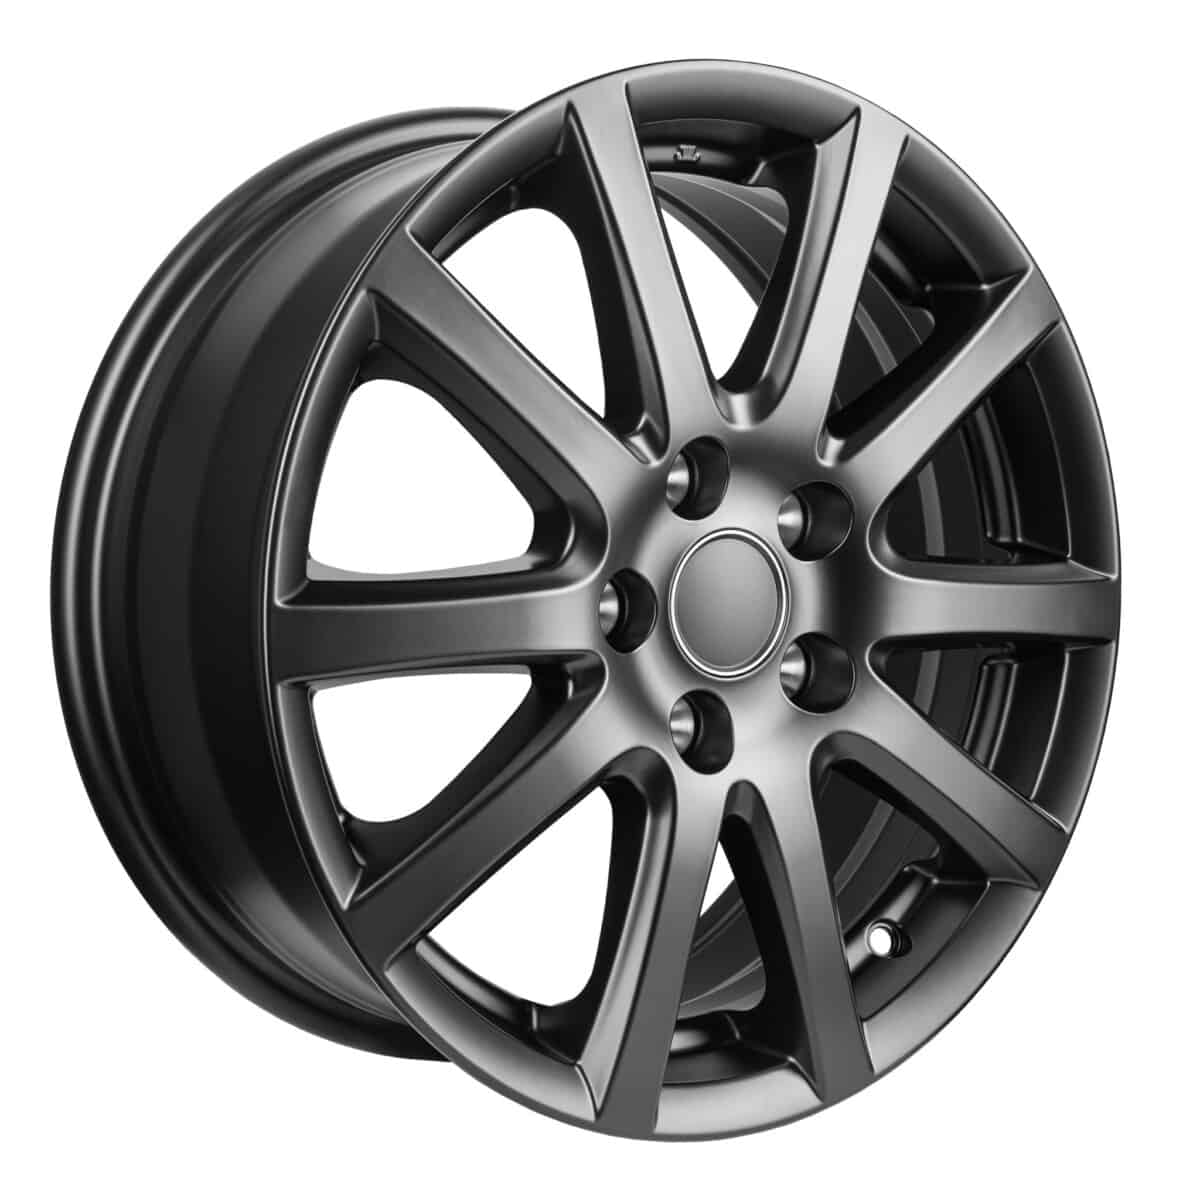 How Much Do Car Rims Cost: 7 Key Factors That Affect Price